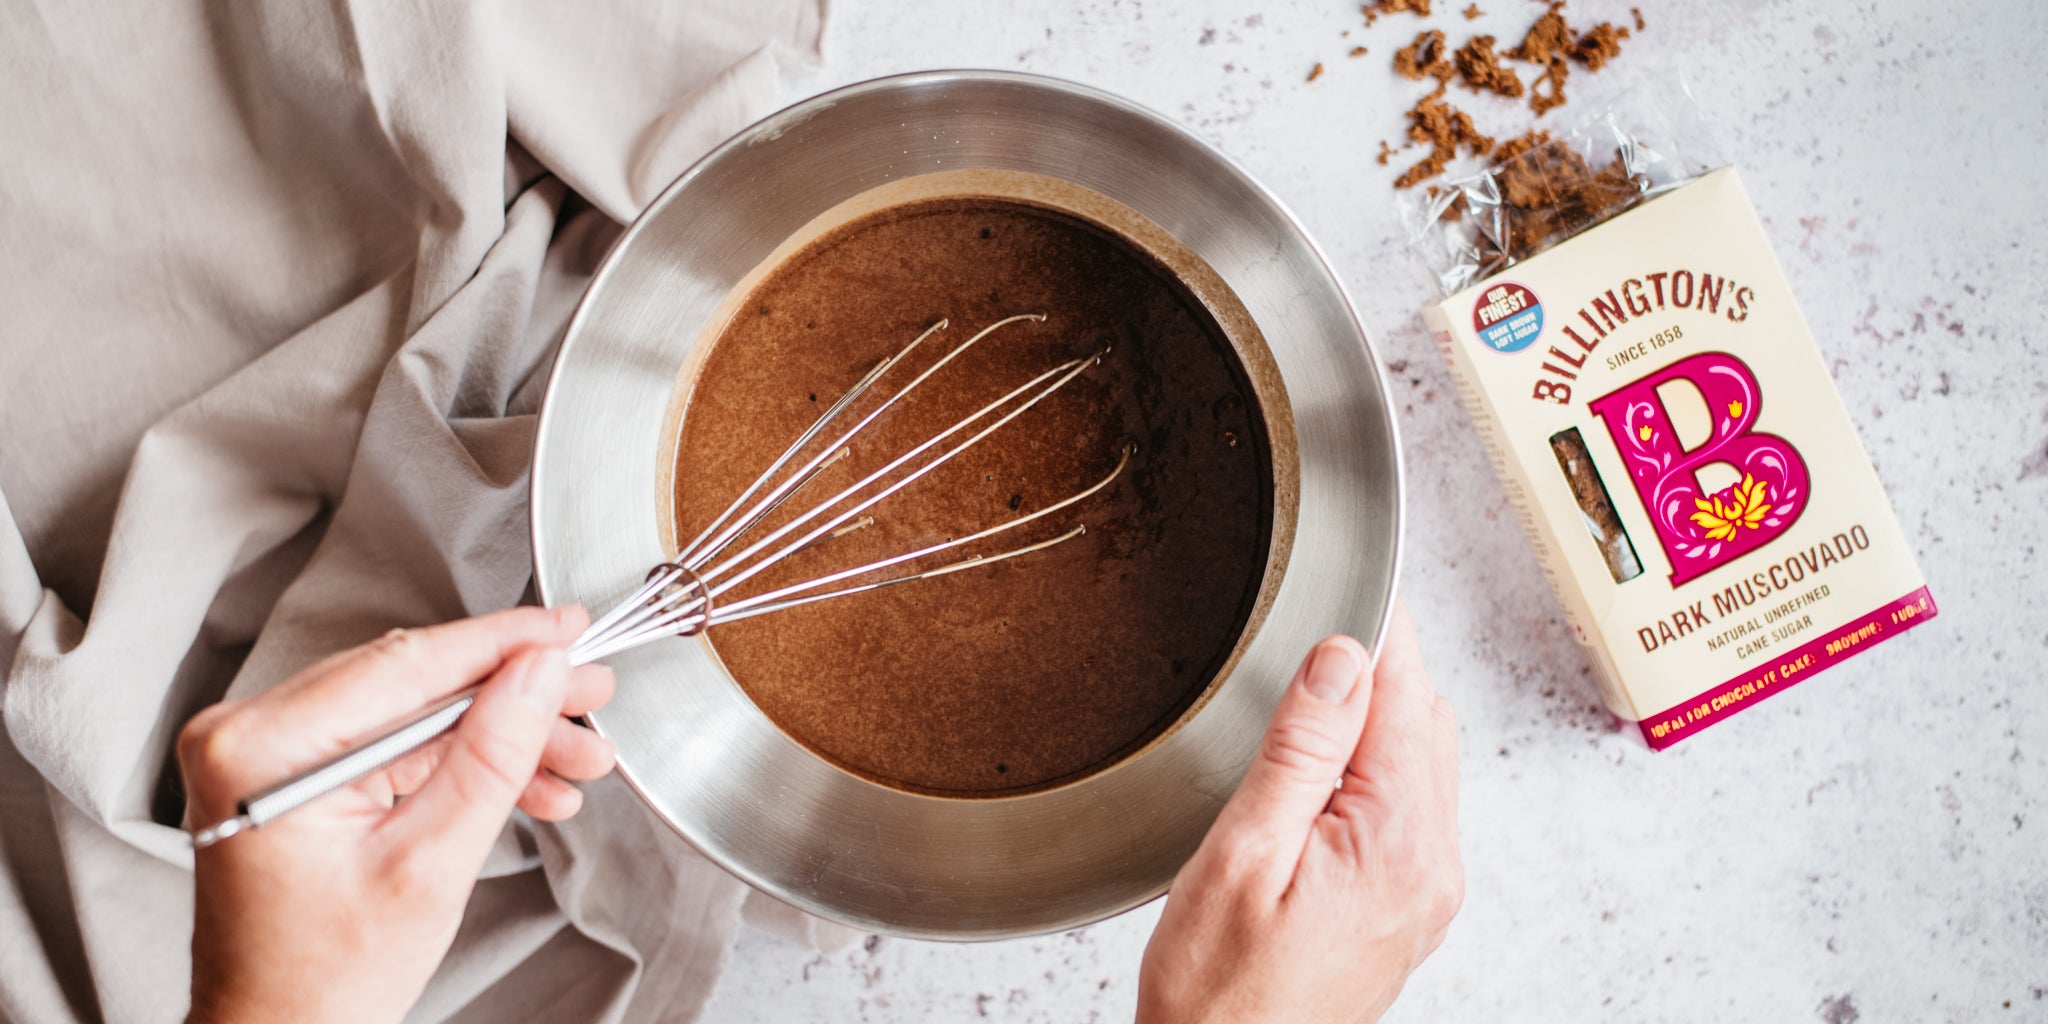 Chocolate batter in bowl with whisk and open sugar packet beside it